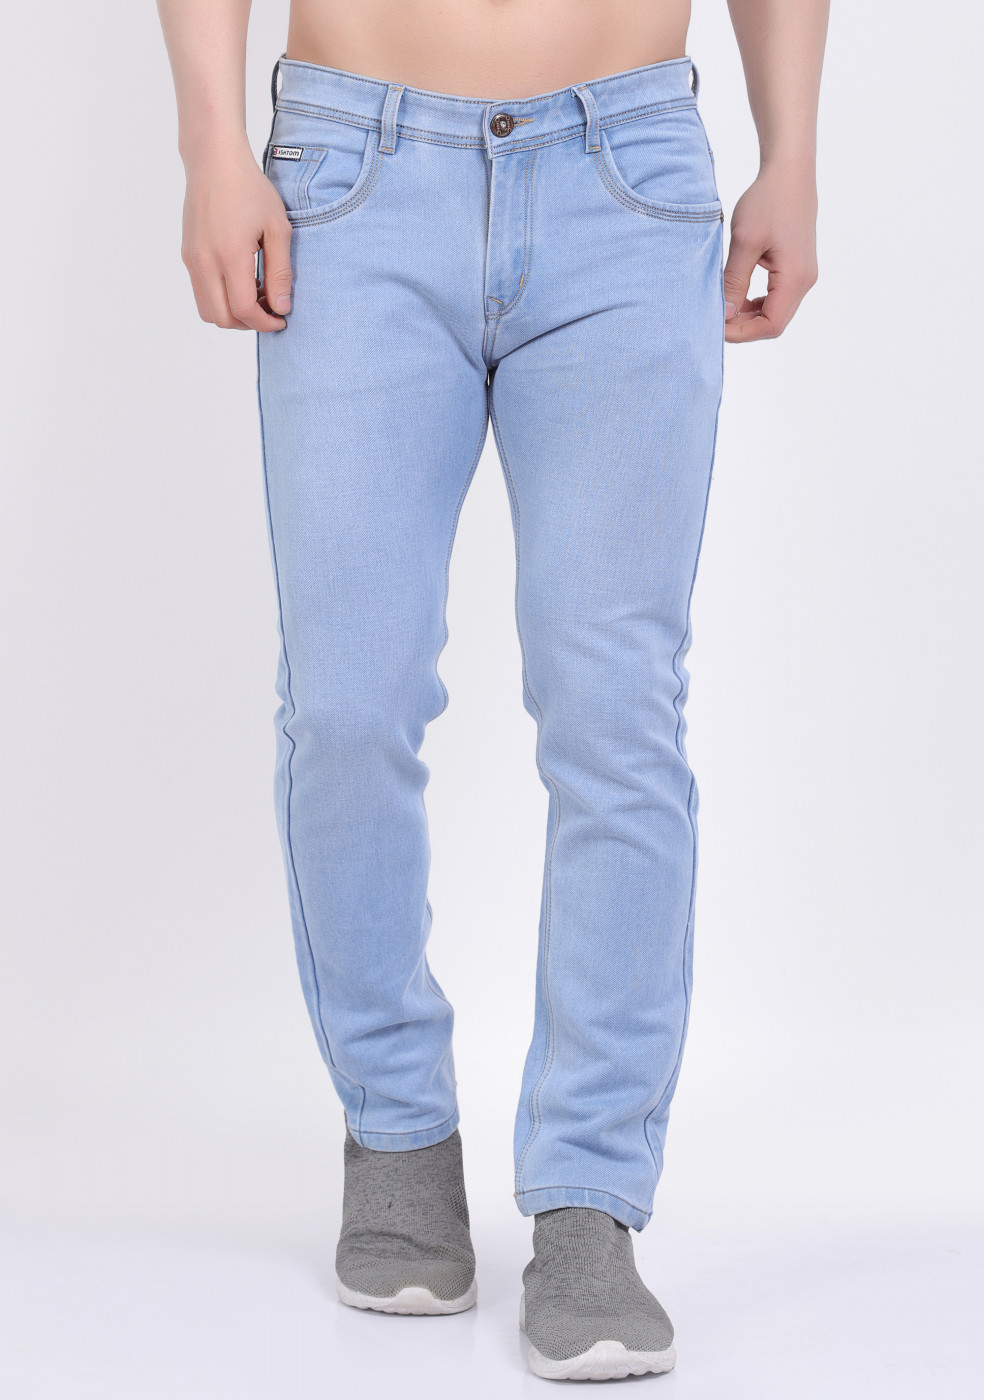 ICE Stretchable Cotton Jeans For Men